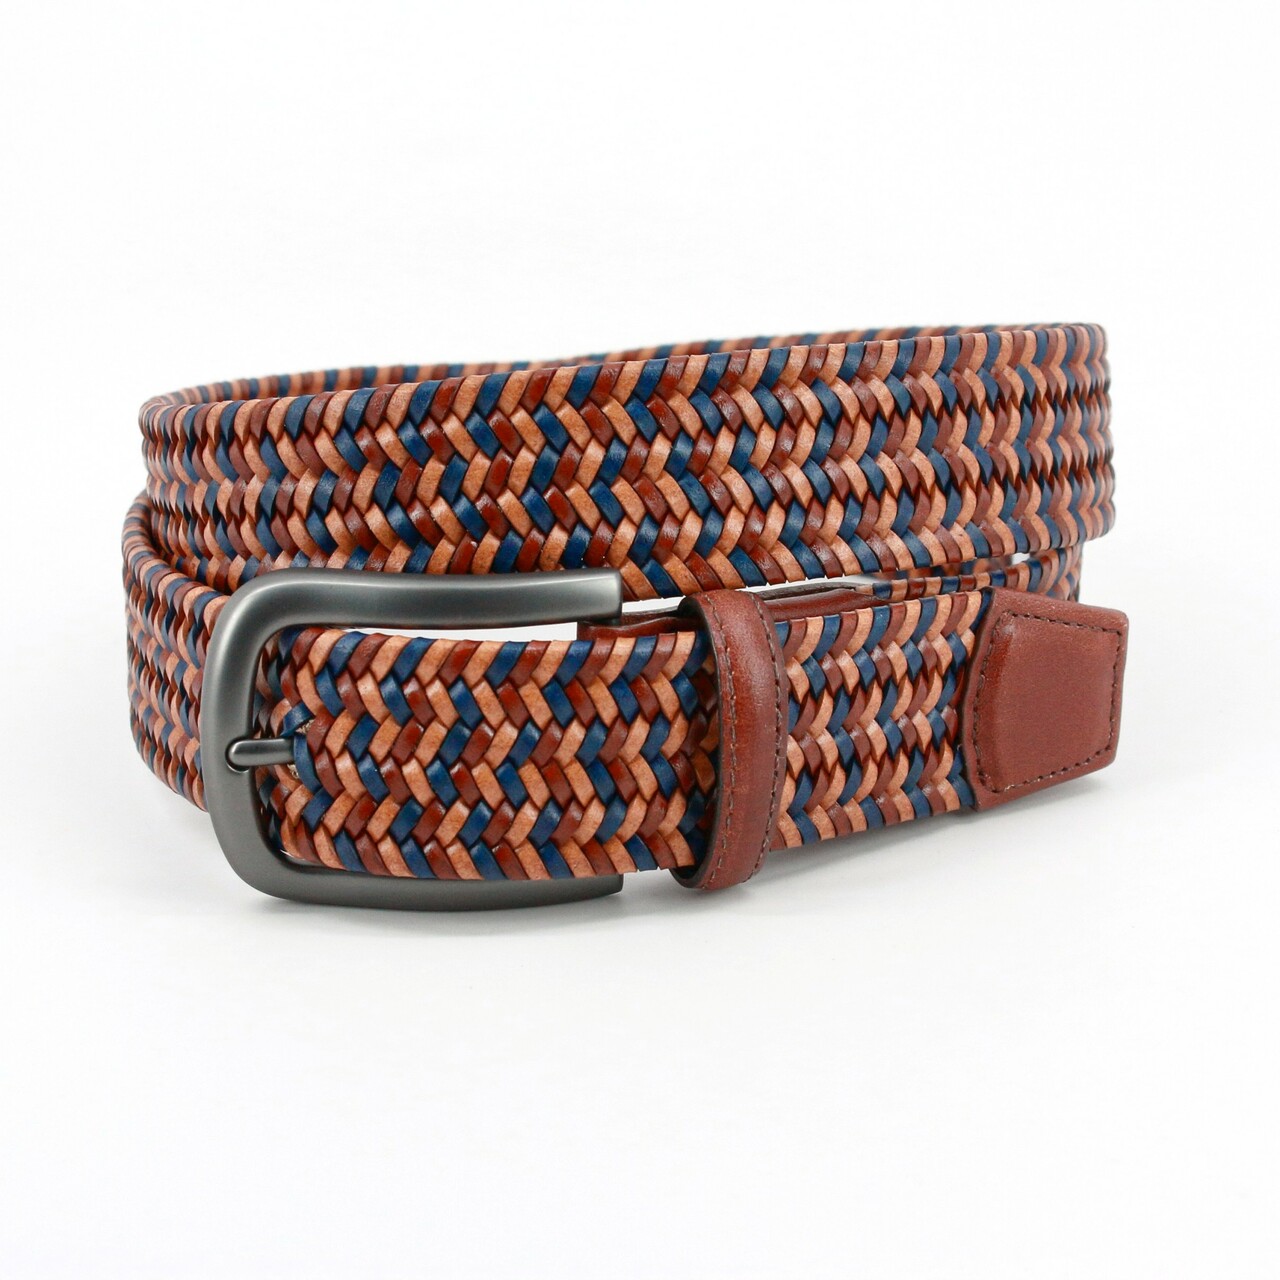 Italian Mini Strand Woven Stretch Leather Belt in Tan, Blue, and Saddle by Torino Leather